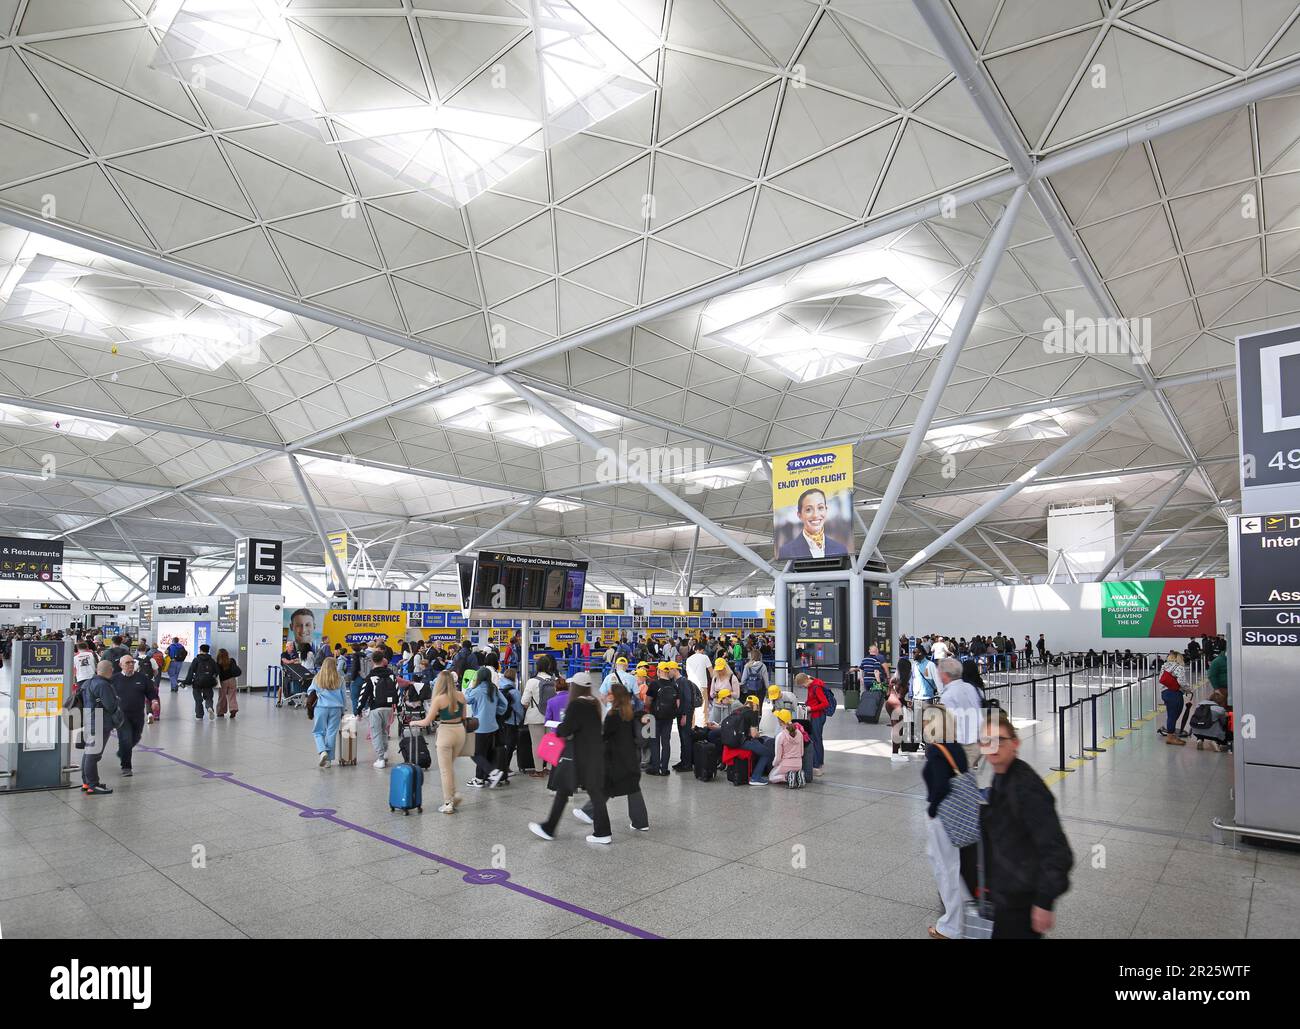 Interior view of Stansted Airport main terminal building showing distinctive roof structure. Designed by Norman Foster. Stock Photo